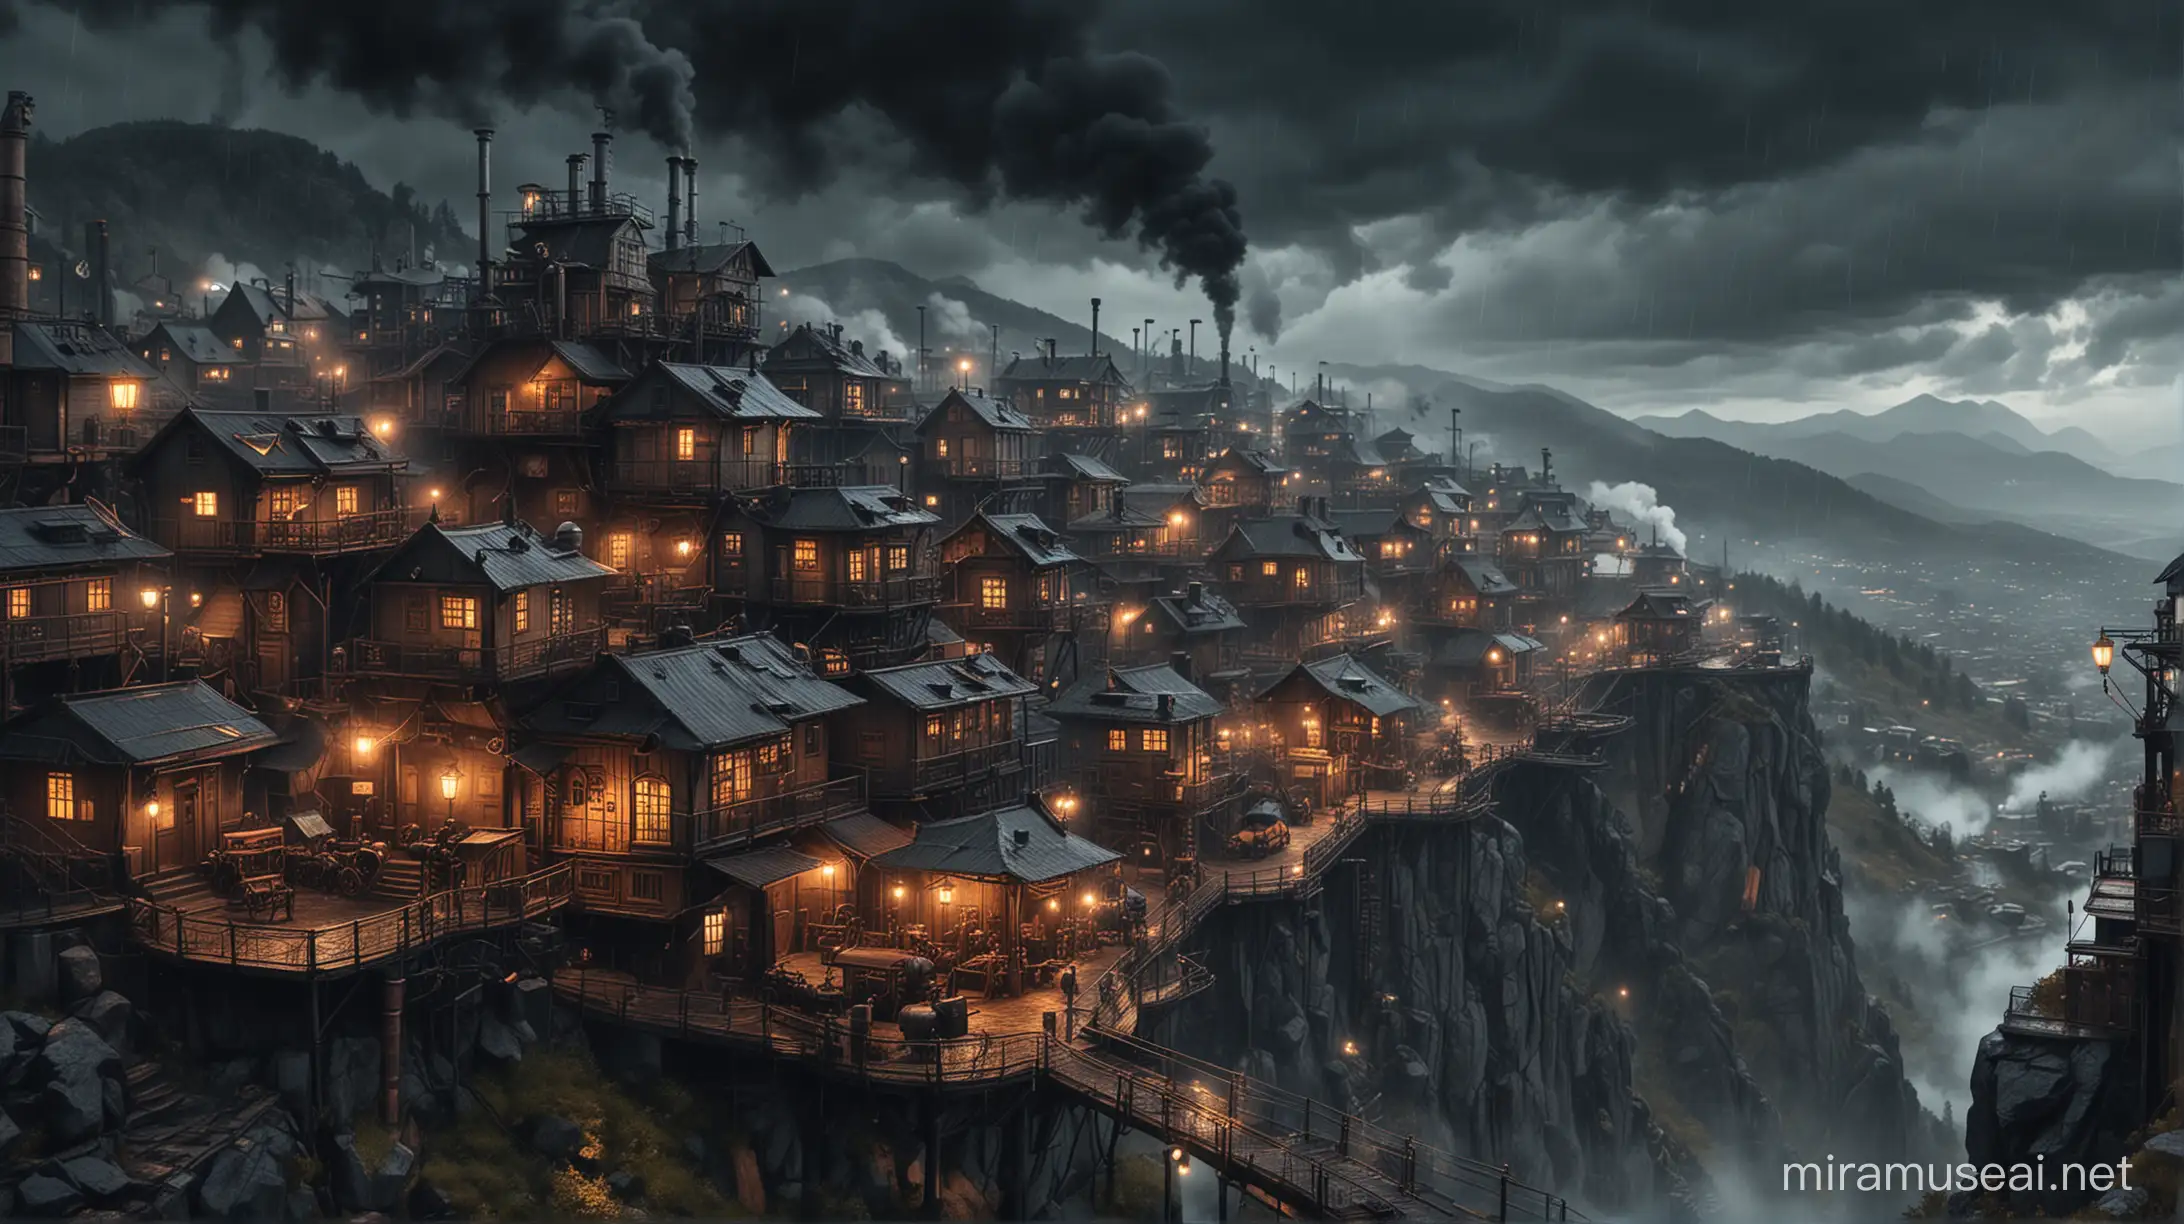 steampunk suburb on the top of a high mountain. windy, rainy and comletely dark. steam and smoke. many lights.